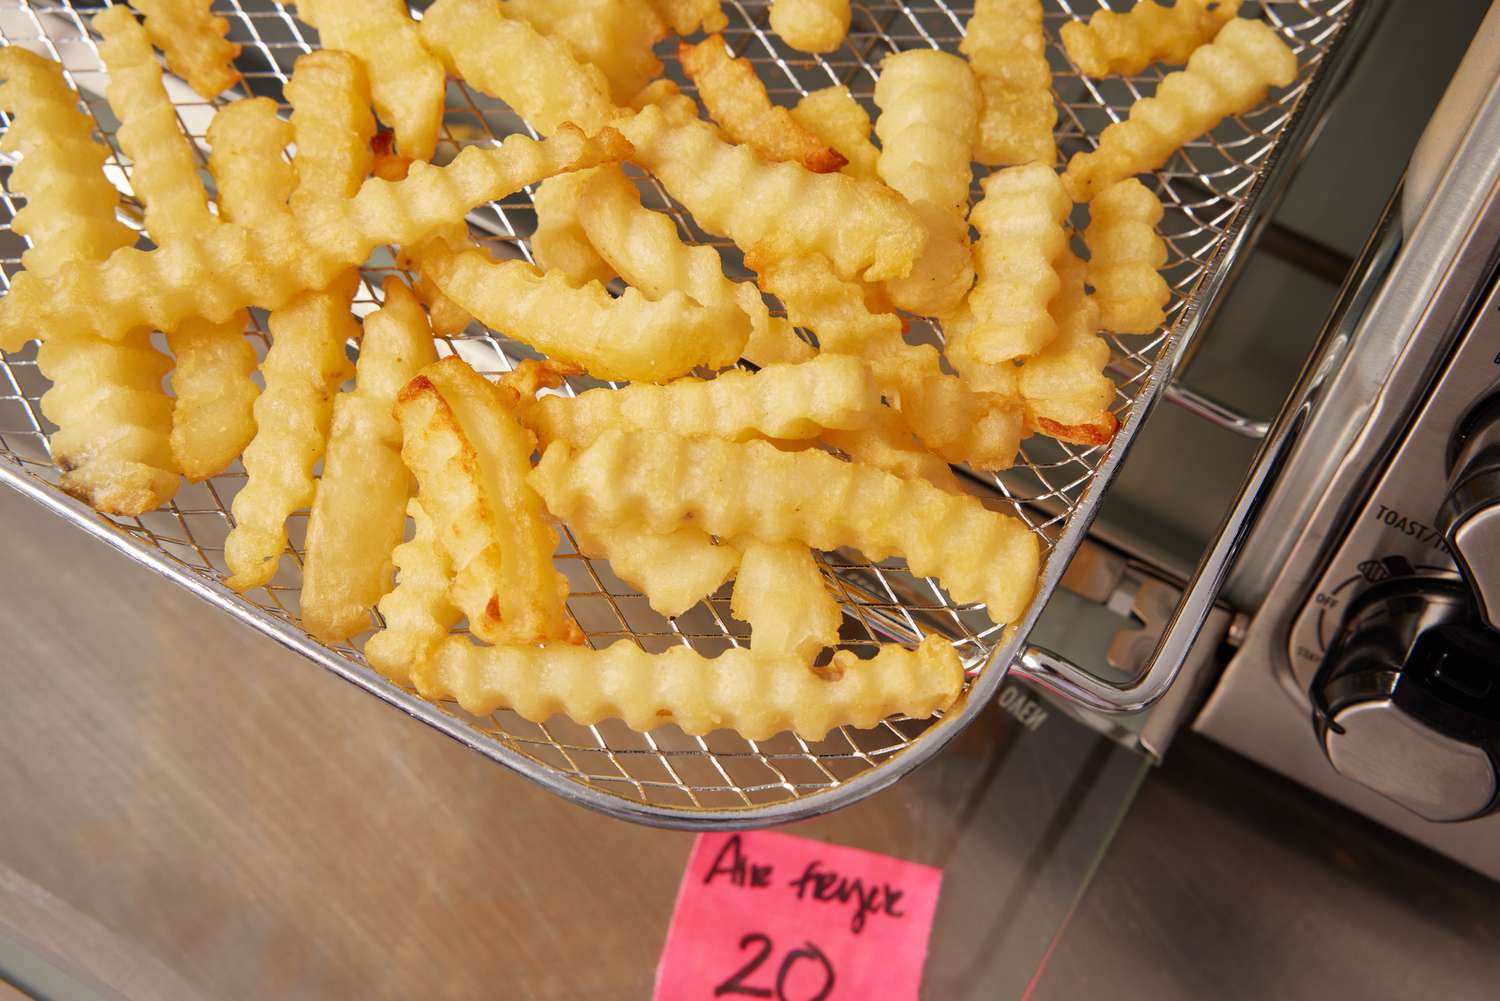 A closeup look at fries in an air fryer toaster oven